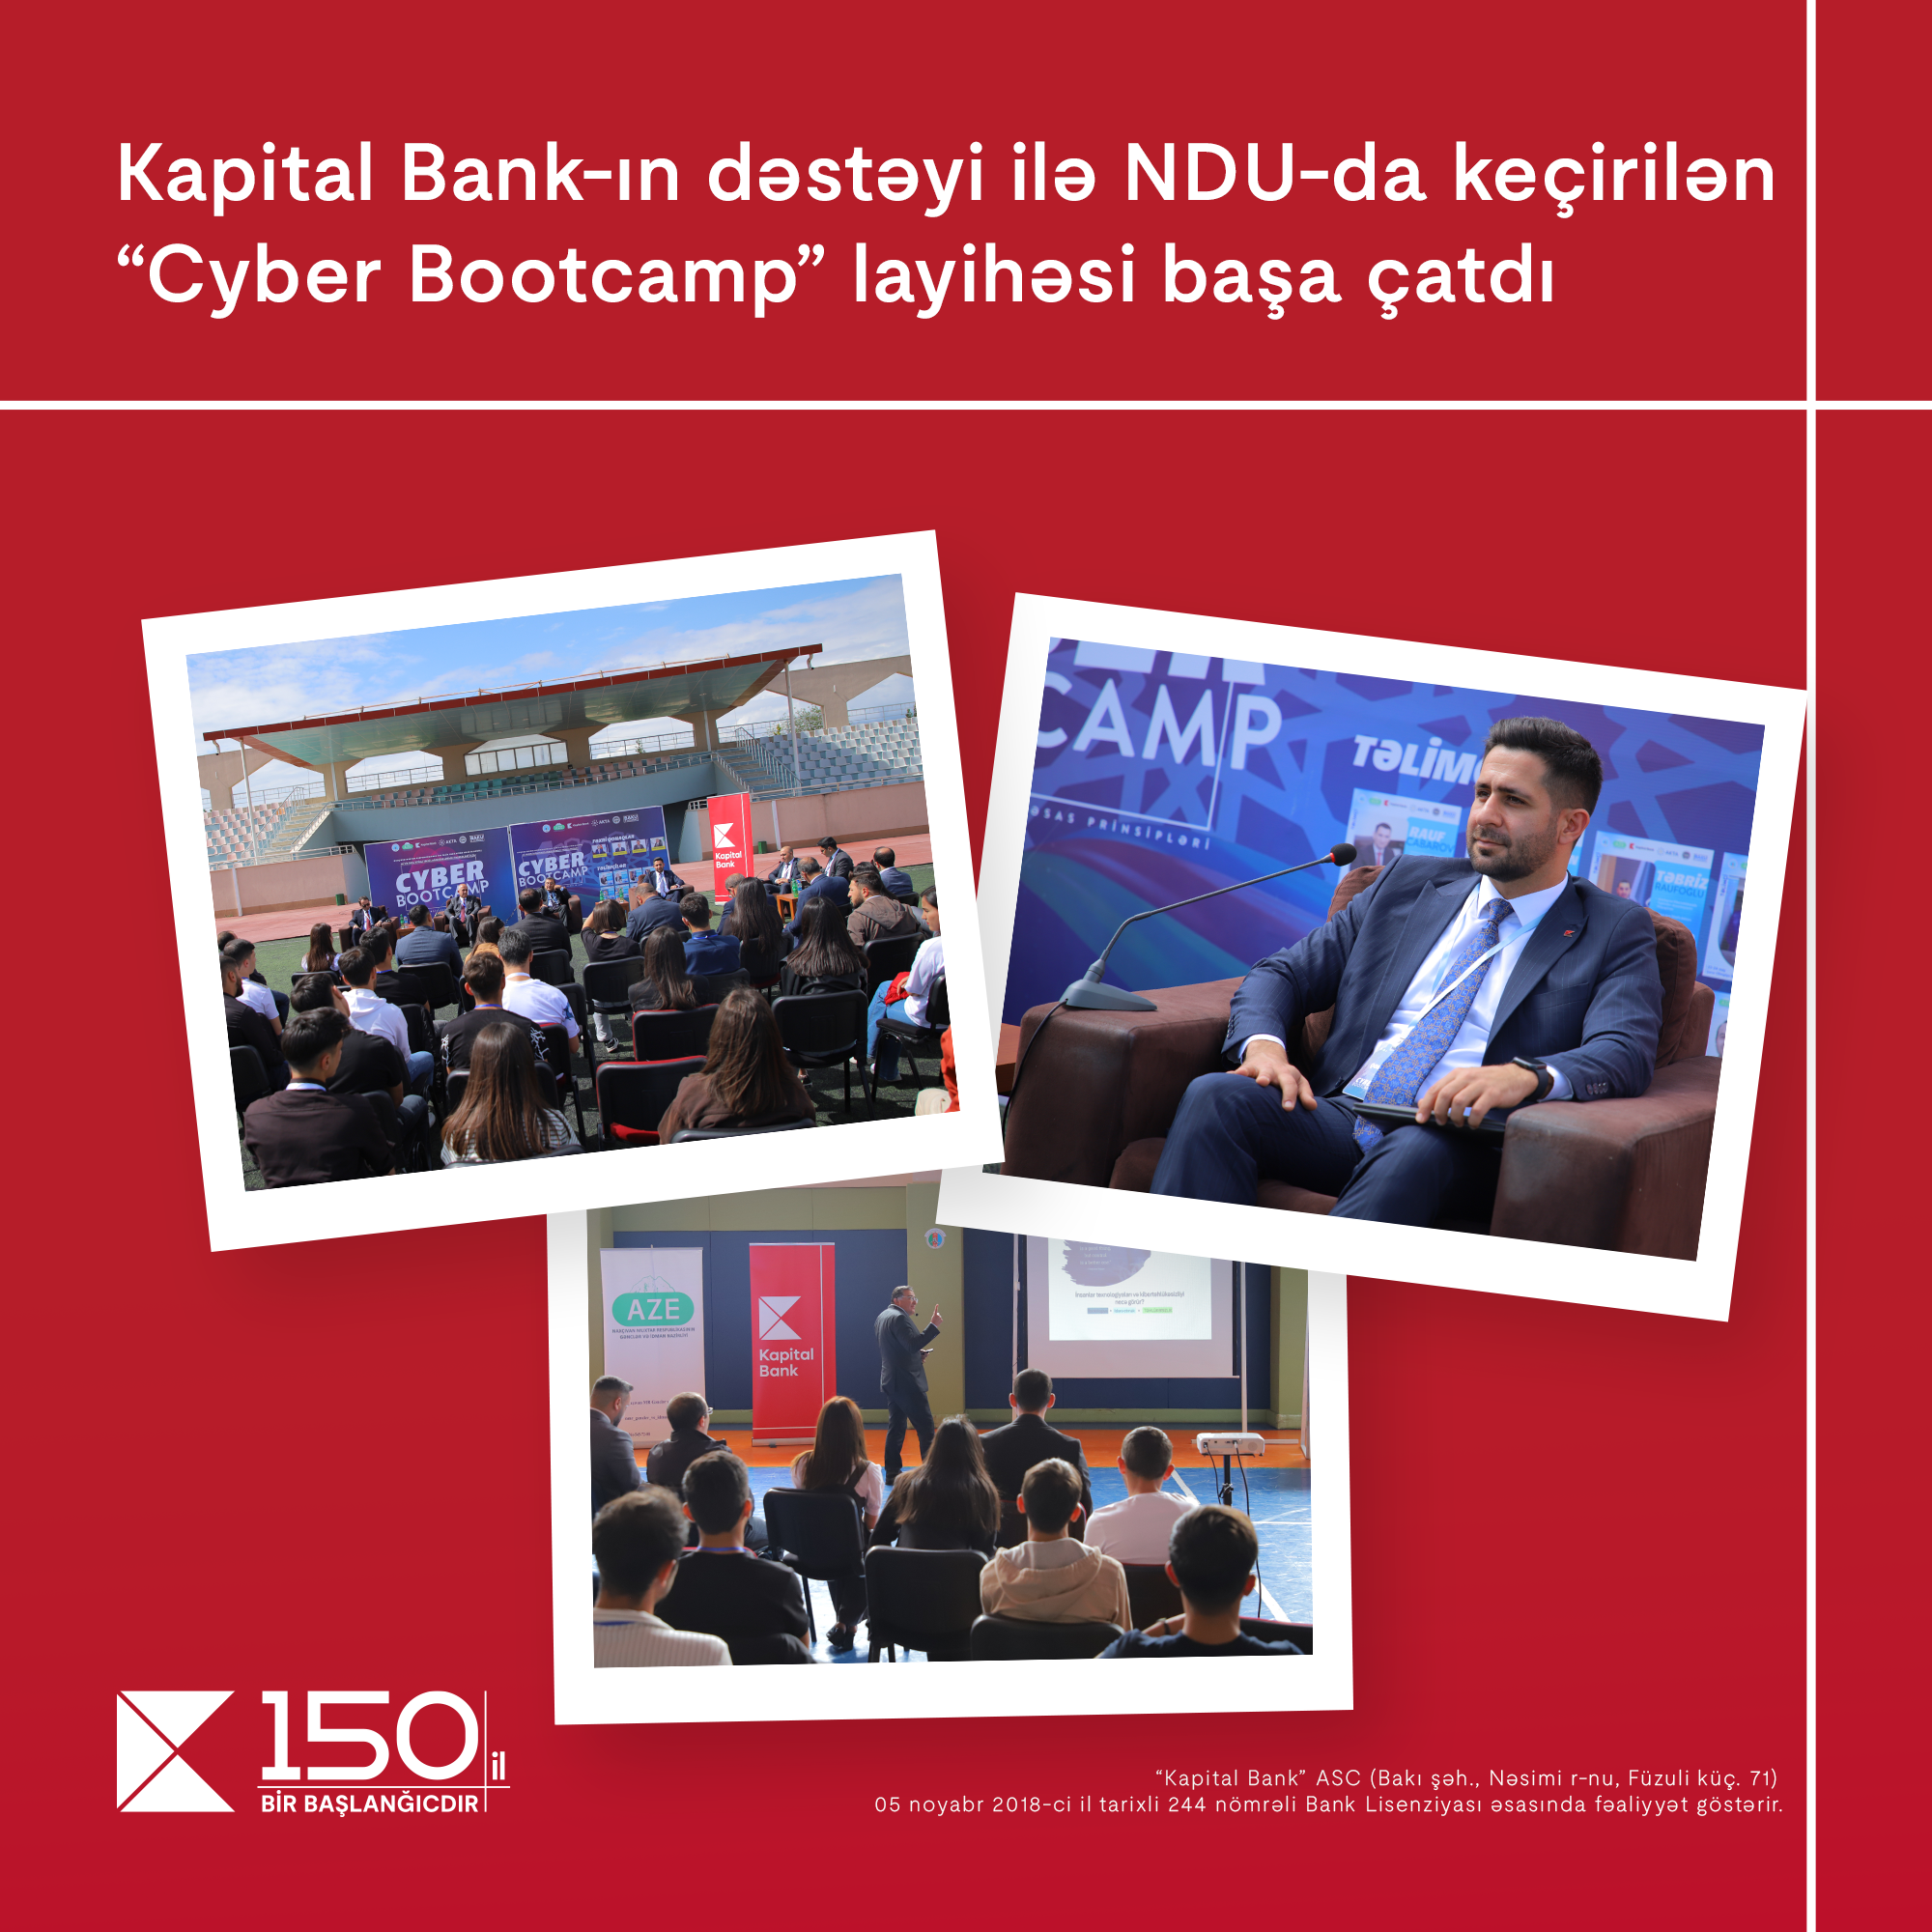 With the support of Kapital Bank, the “Cyber Bootcamp” project at NSU was completed